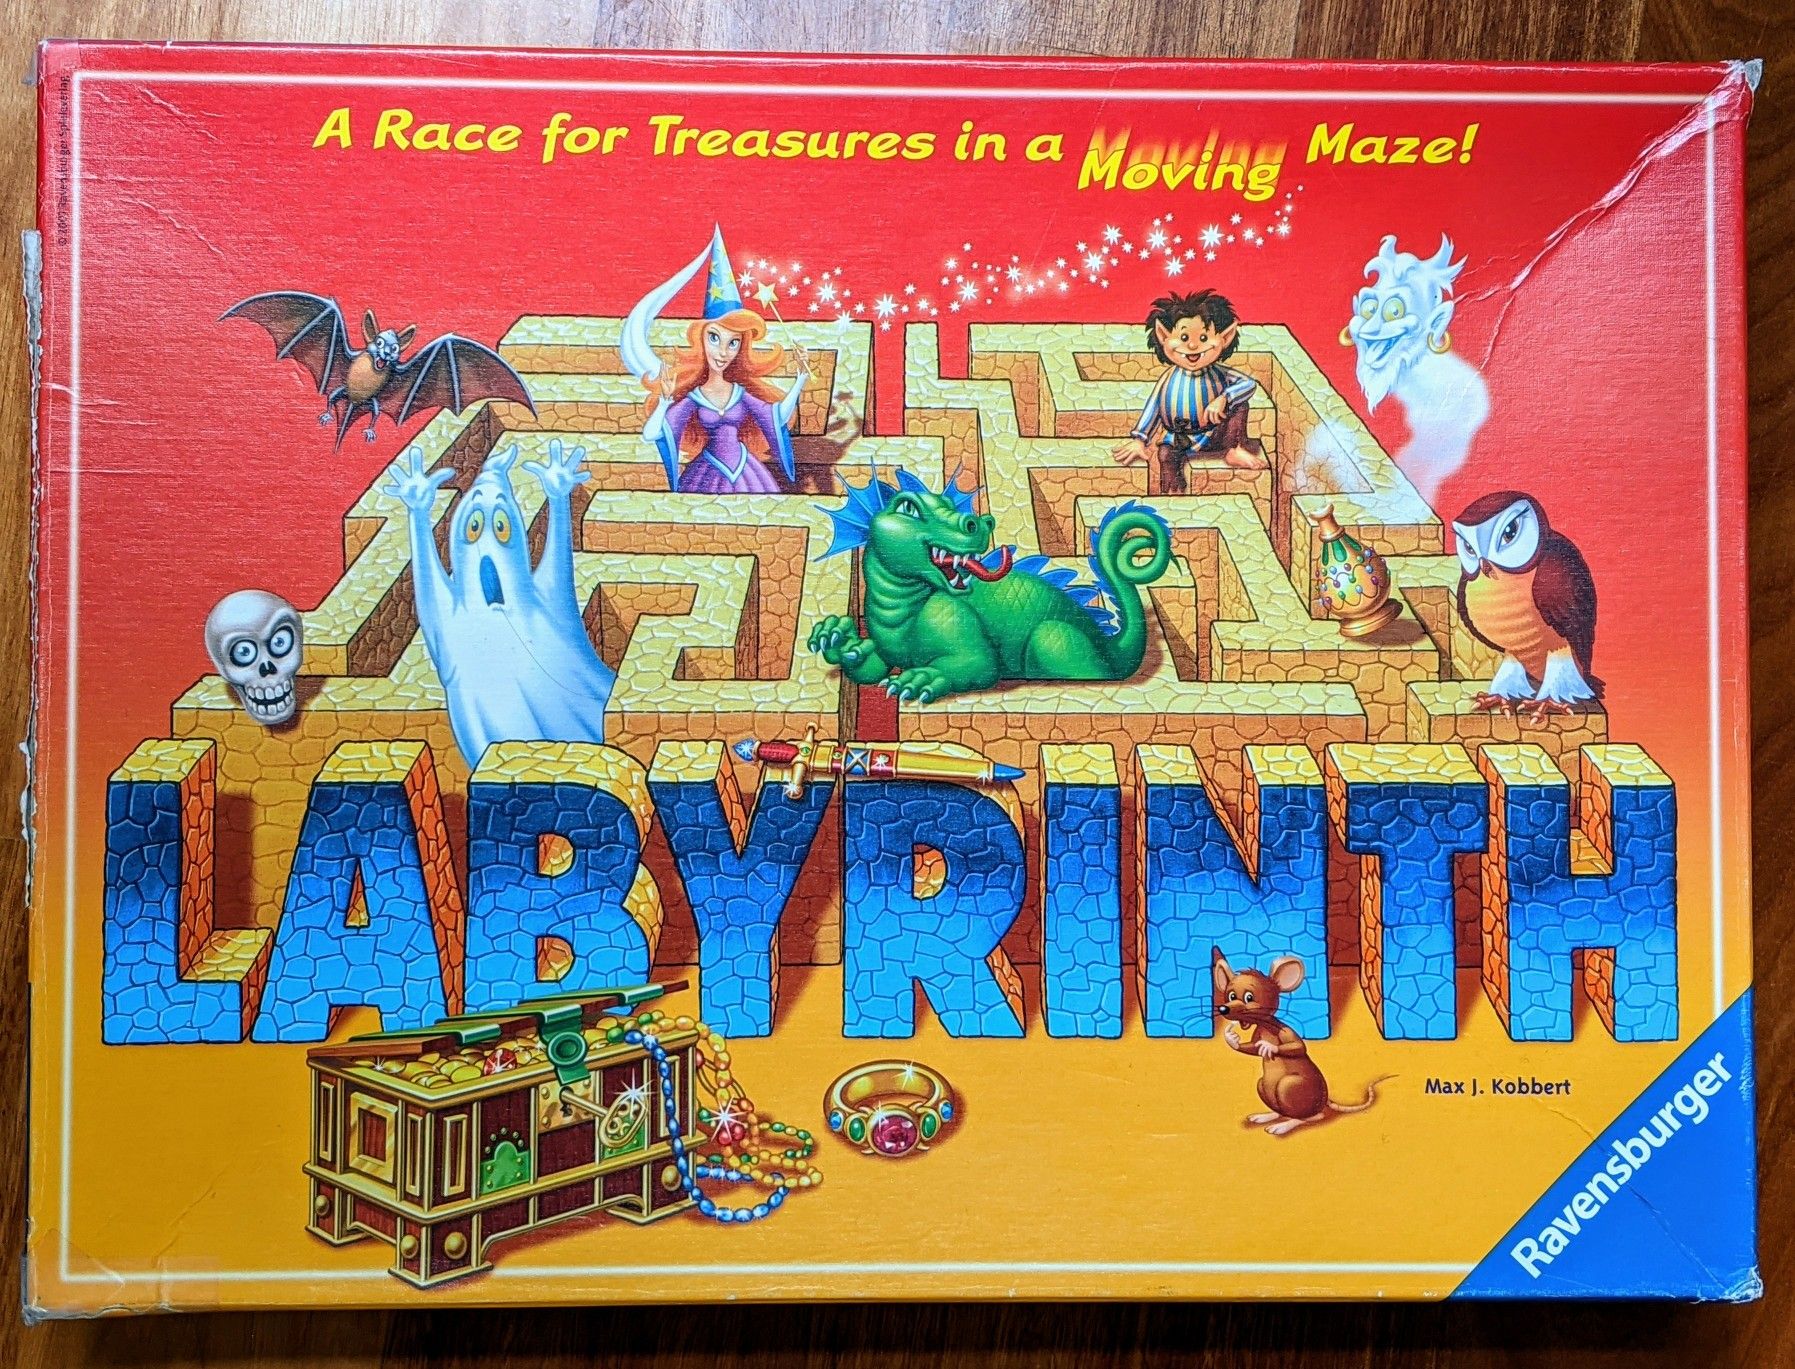 Game, moving maze, labyrinth, ravensburger, 2-4 players, ages 7-99